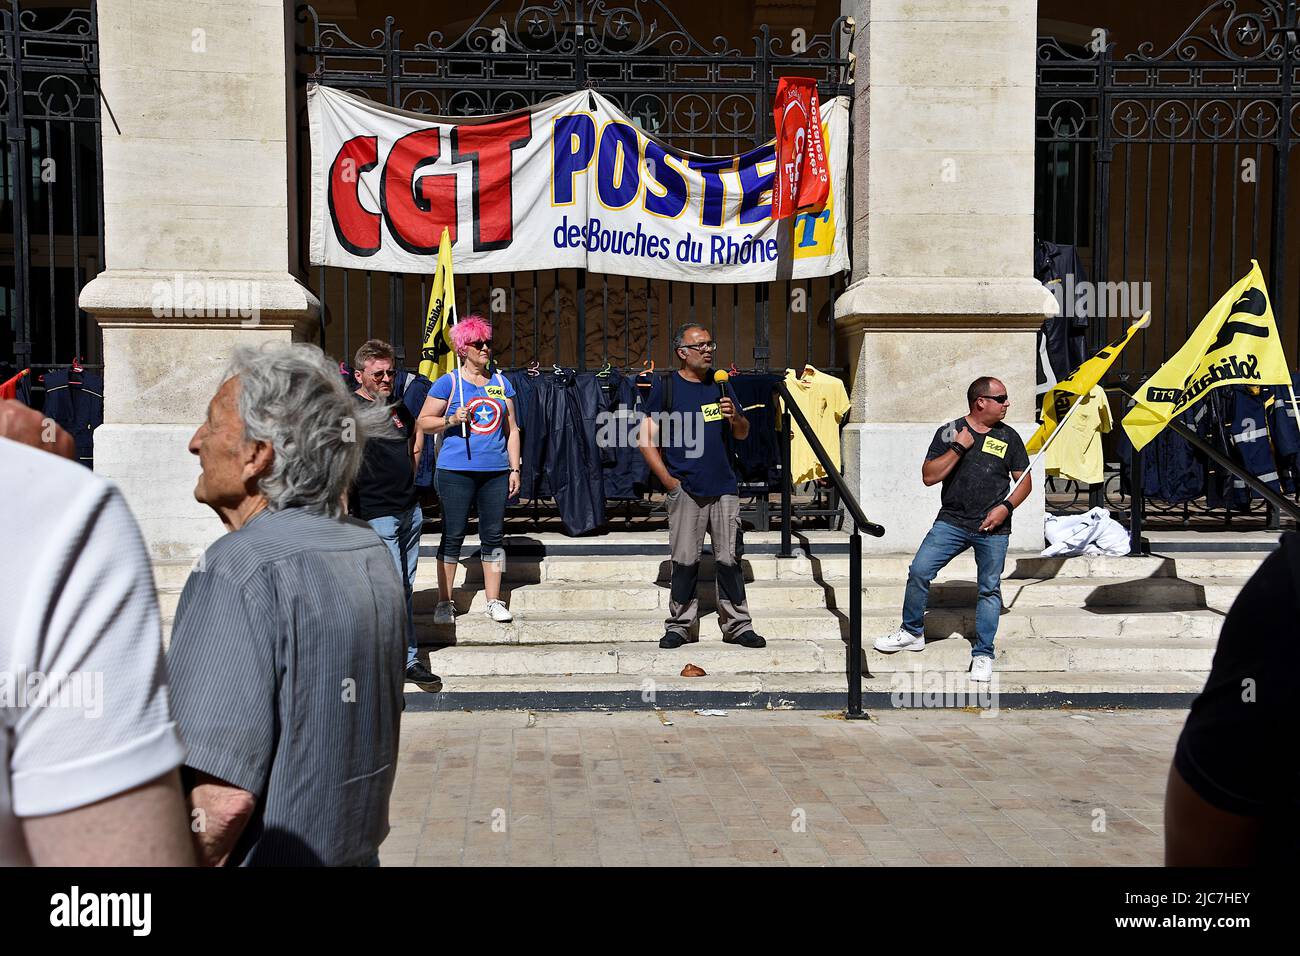 A trade unionist postal worker speaks during the demonstration. The Marseille postal workers held a strike against the reorganisation of rounds in the 1st, 2nd, 3rd, 4th and 14th arrondissements of Marseille which would lead to job cuts. Stock Photo